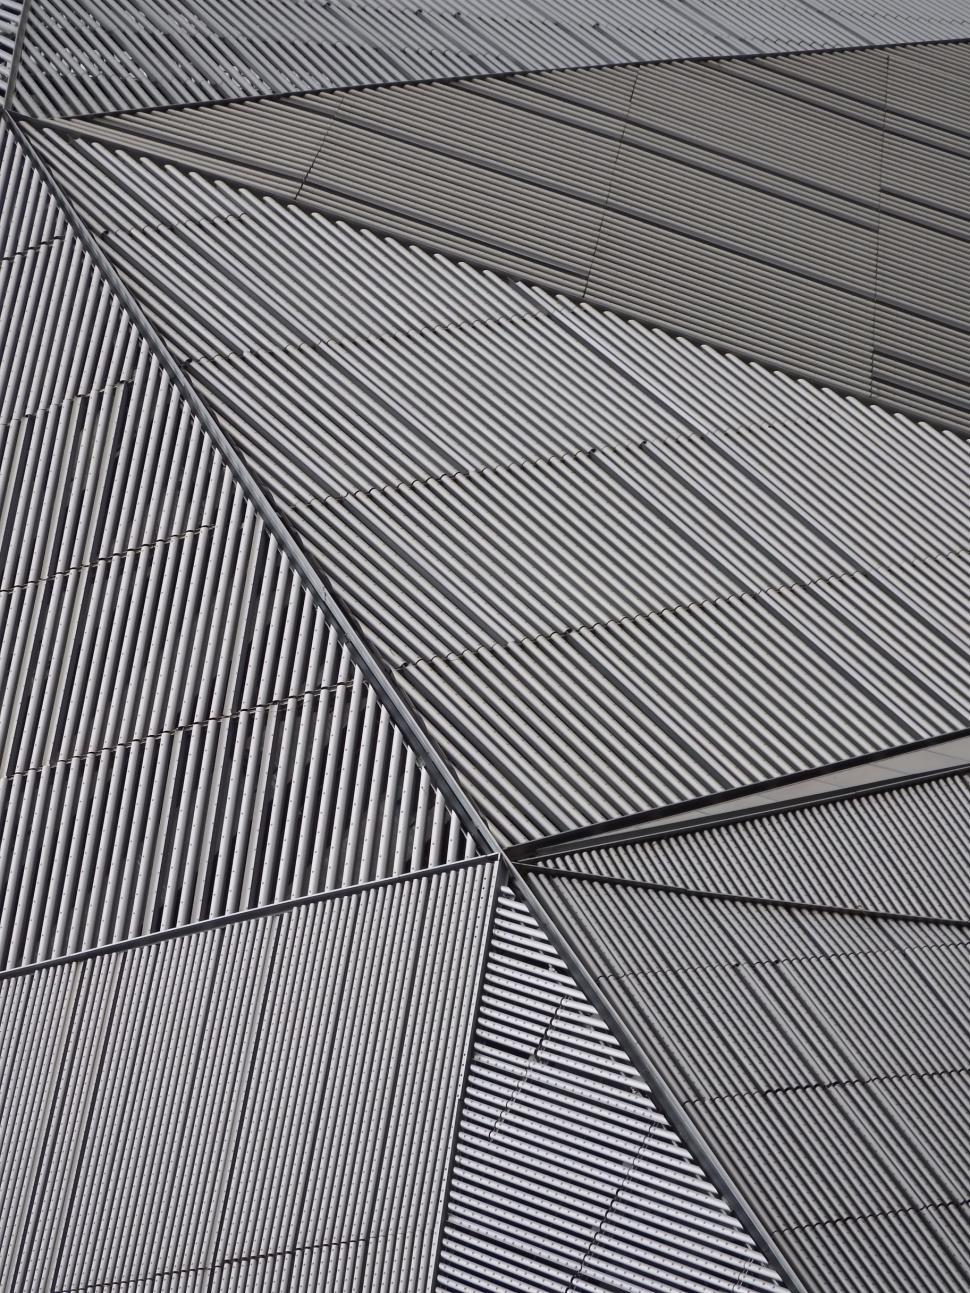 Free Image of Abstract Metal Architechture  